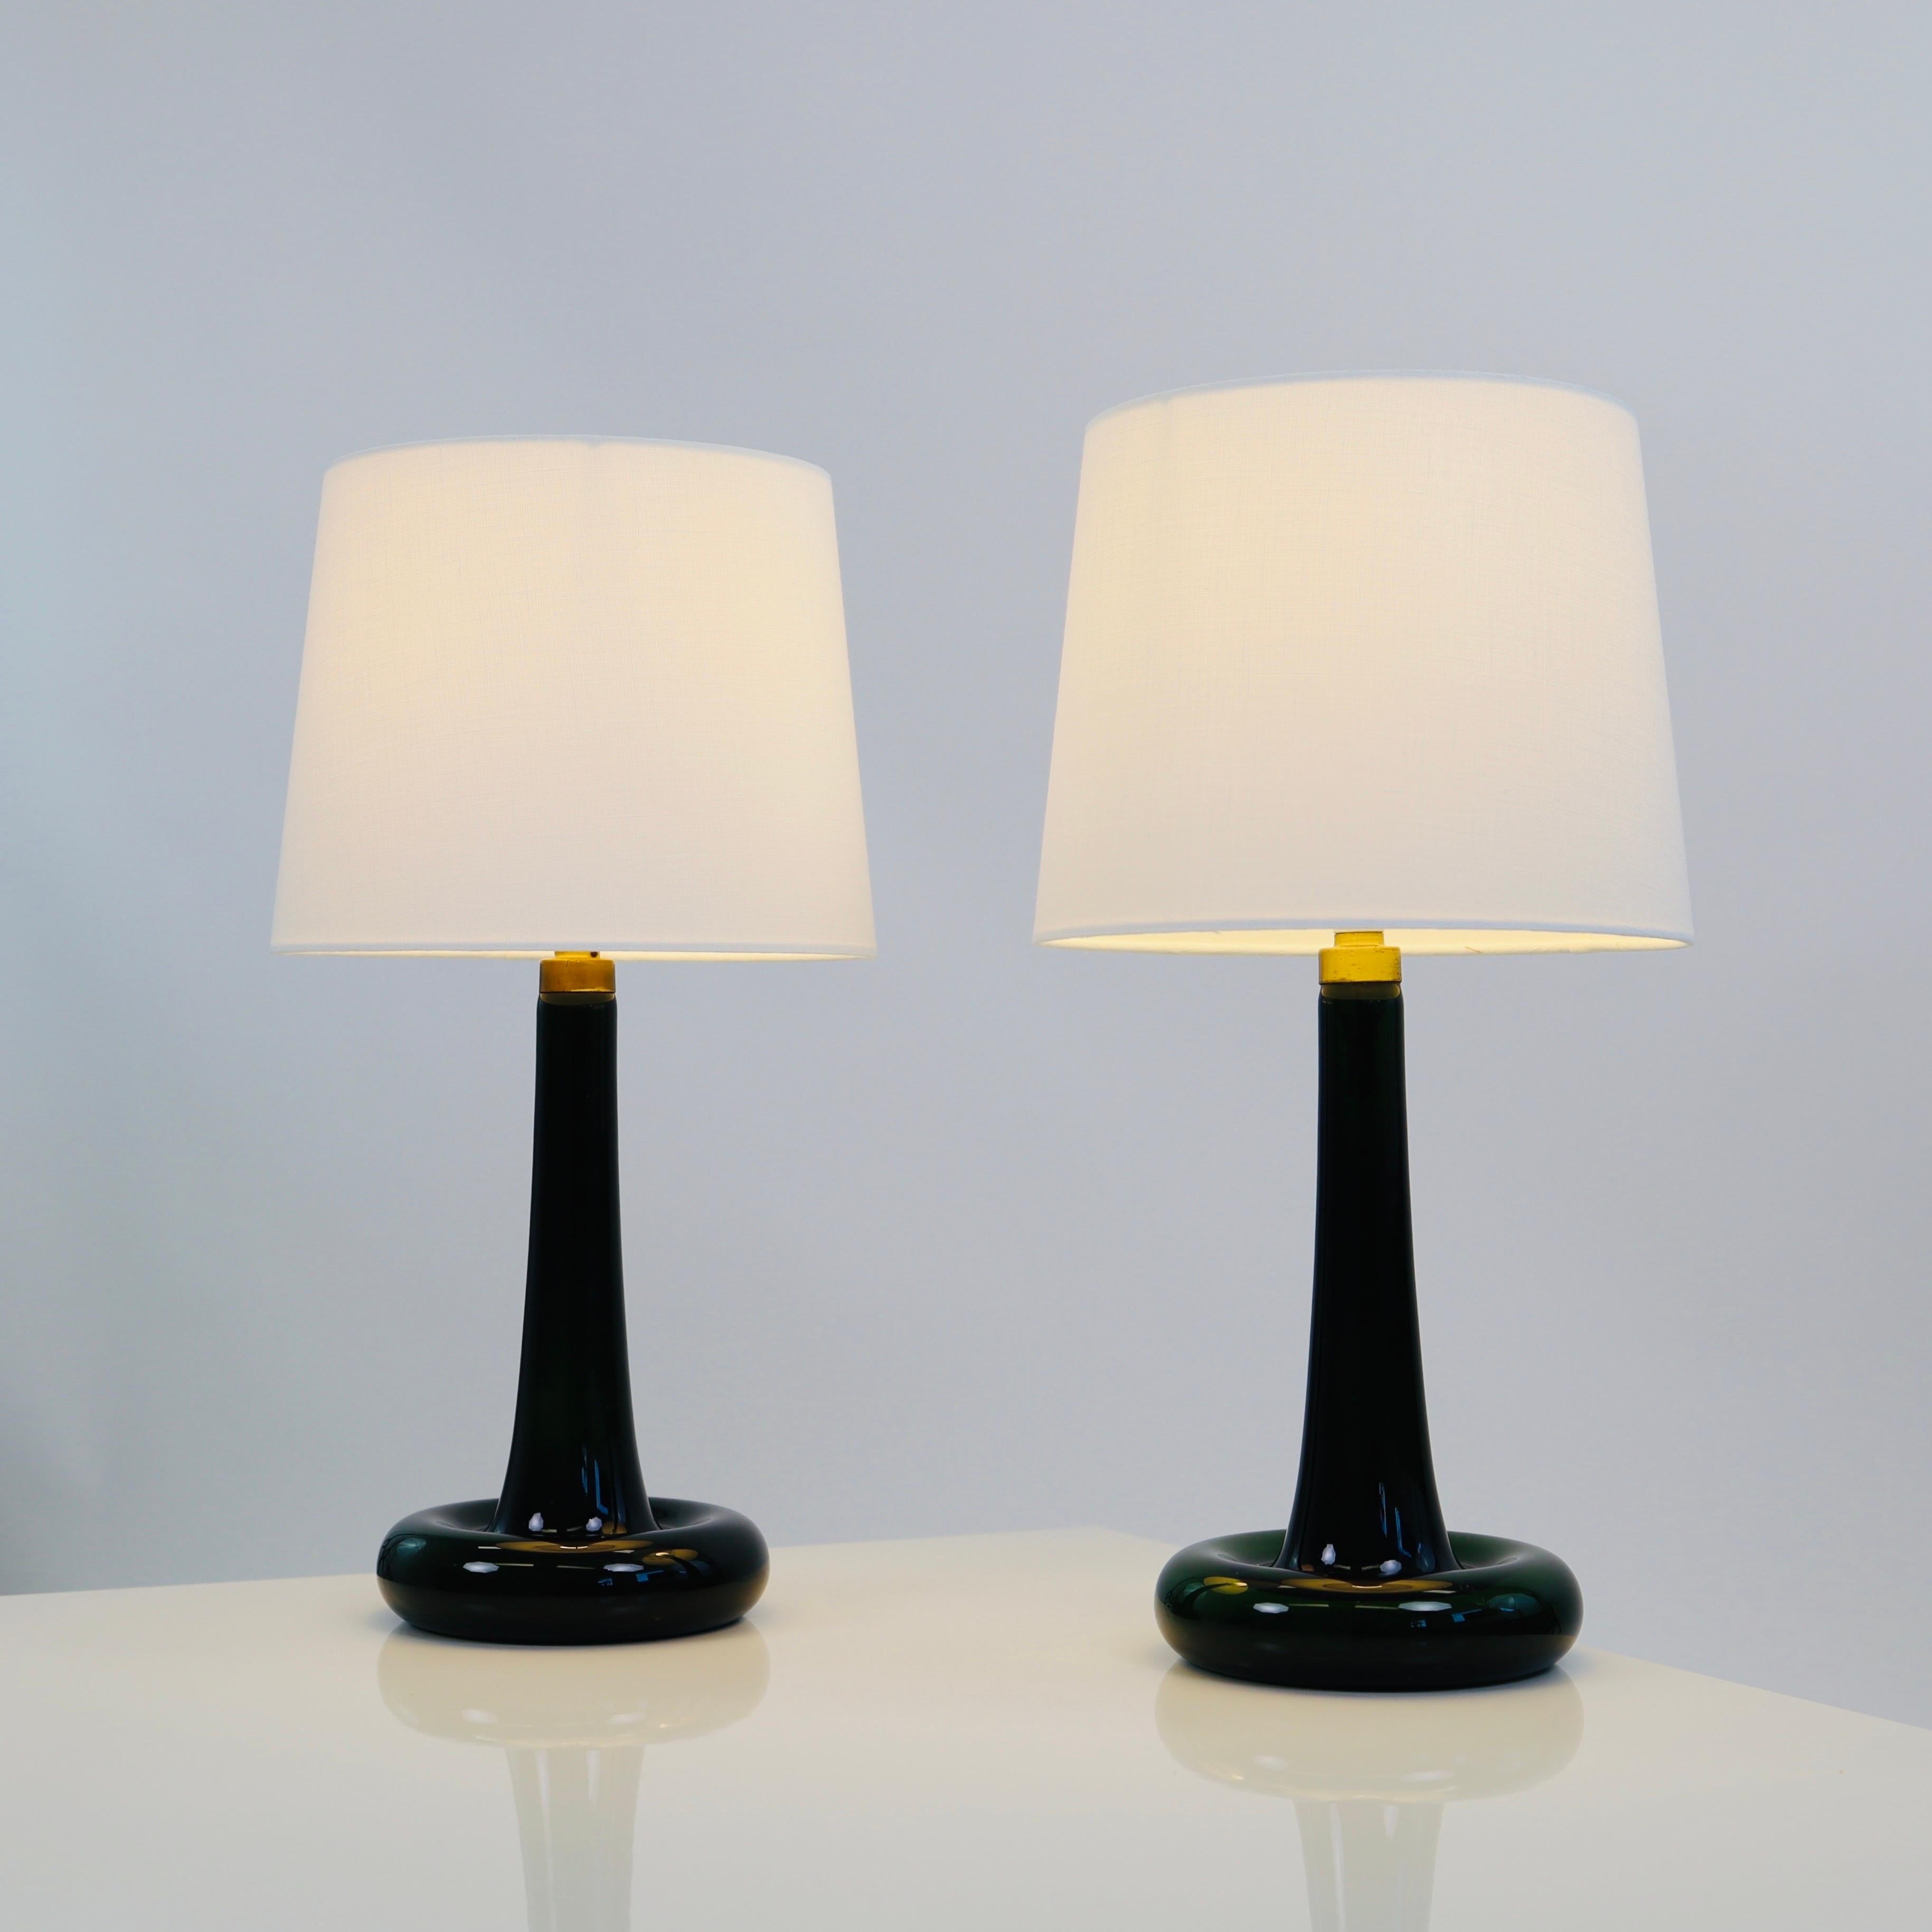 Blown Glass Set of Green Glass Desk Lamps by Michael Bang for Holmegaard, 1970s, Denmark For Sale